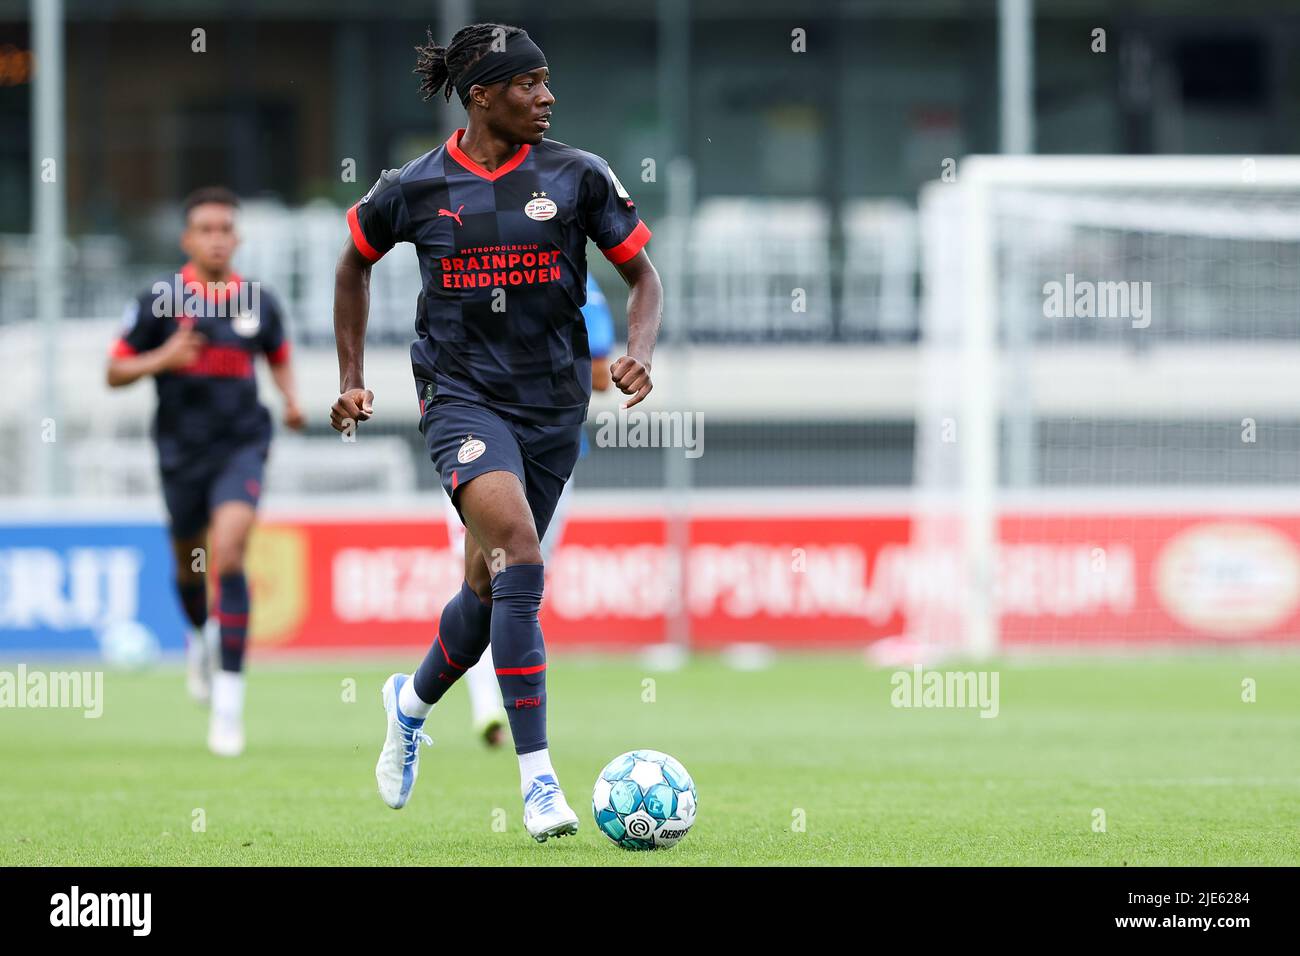 EINDHOVEN, NETHERLANDS - JUNE 25: Noni Madueke of PSV Eindhoven during the Pre Season Friendly match between PSV Eindhoven and BW Lohne at PSV Campus De Herdgang on June 25, 2022 in EIndhoven, Netherlands (Photo by Hans van der Valk/Orange Pictures) Stock Photo